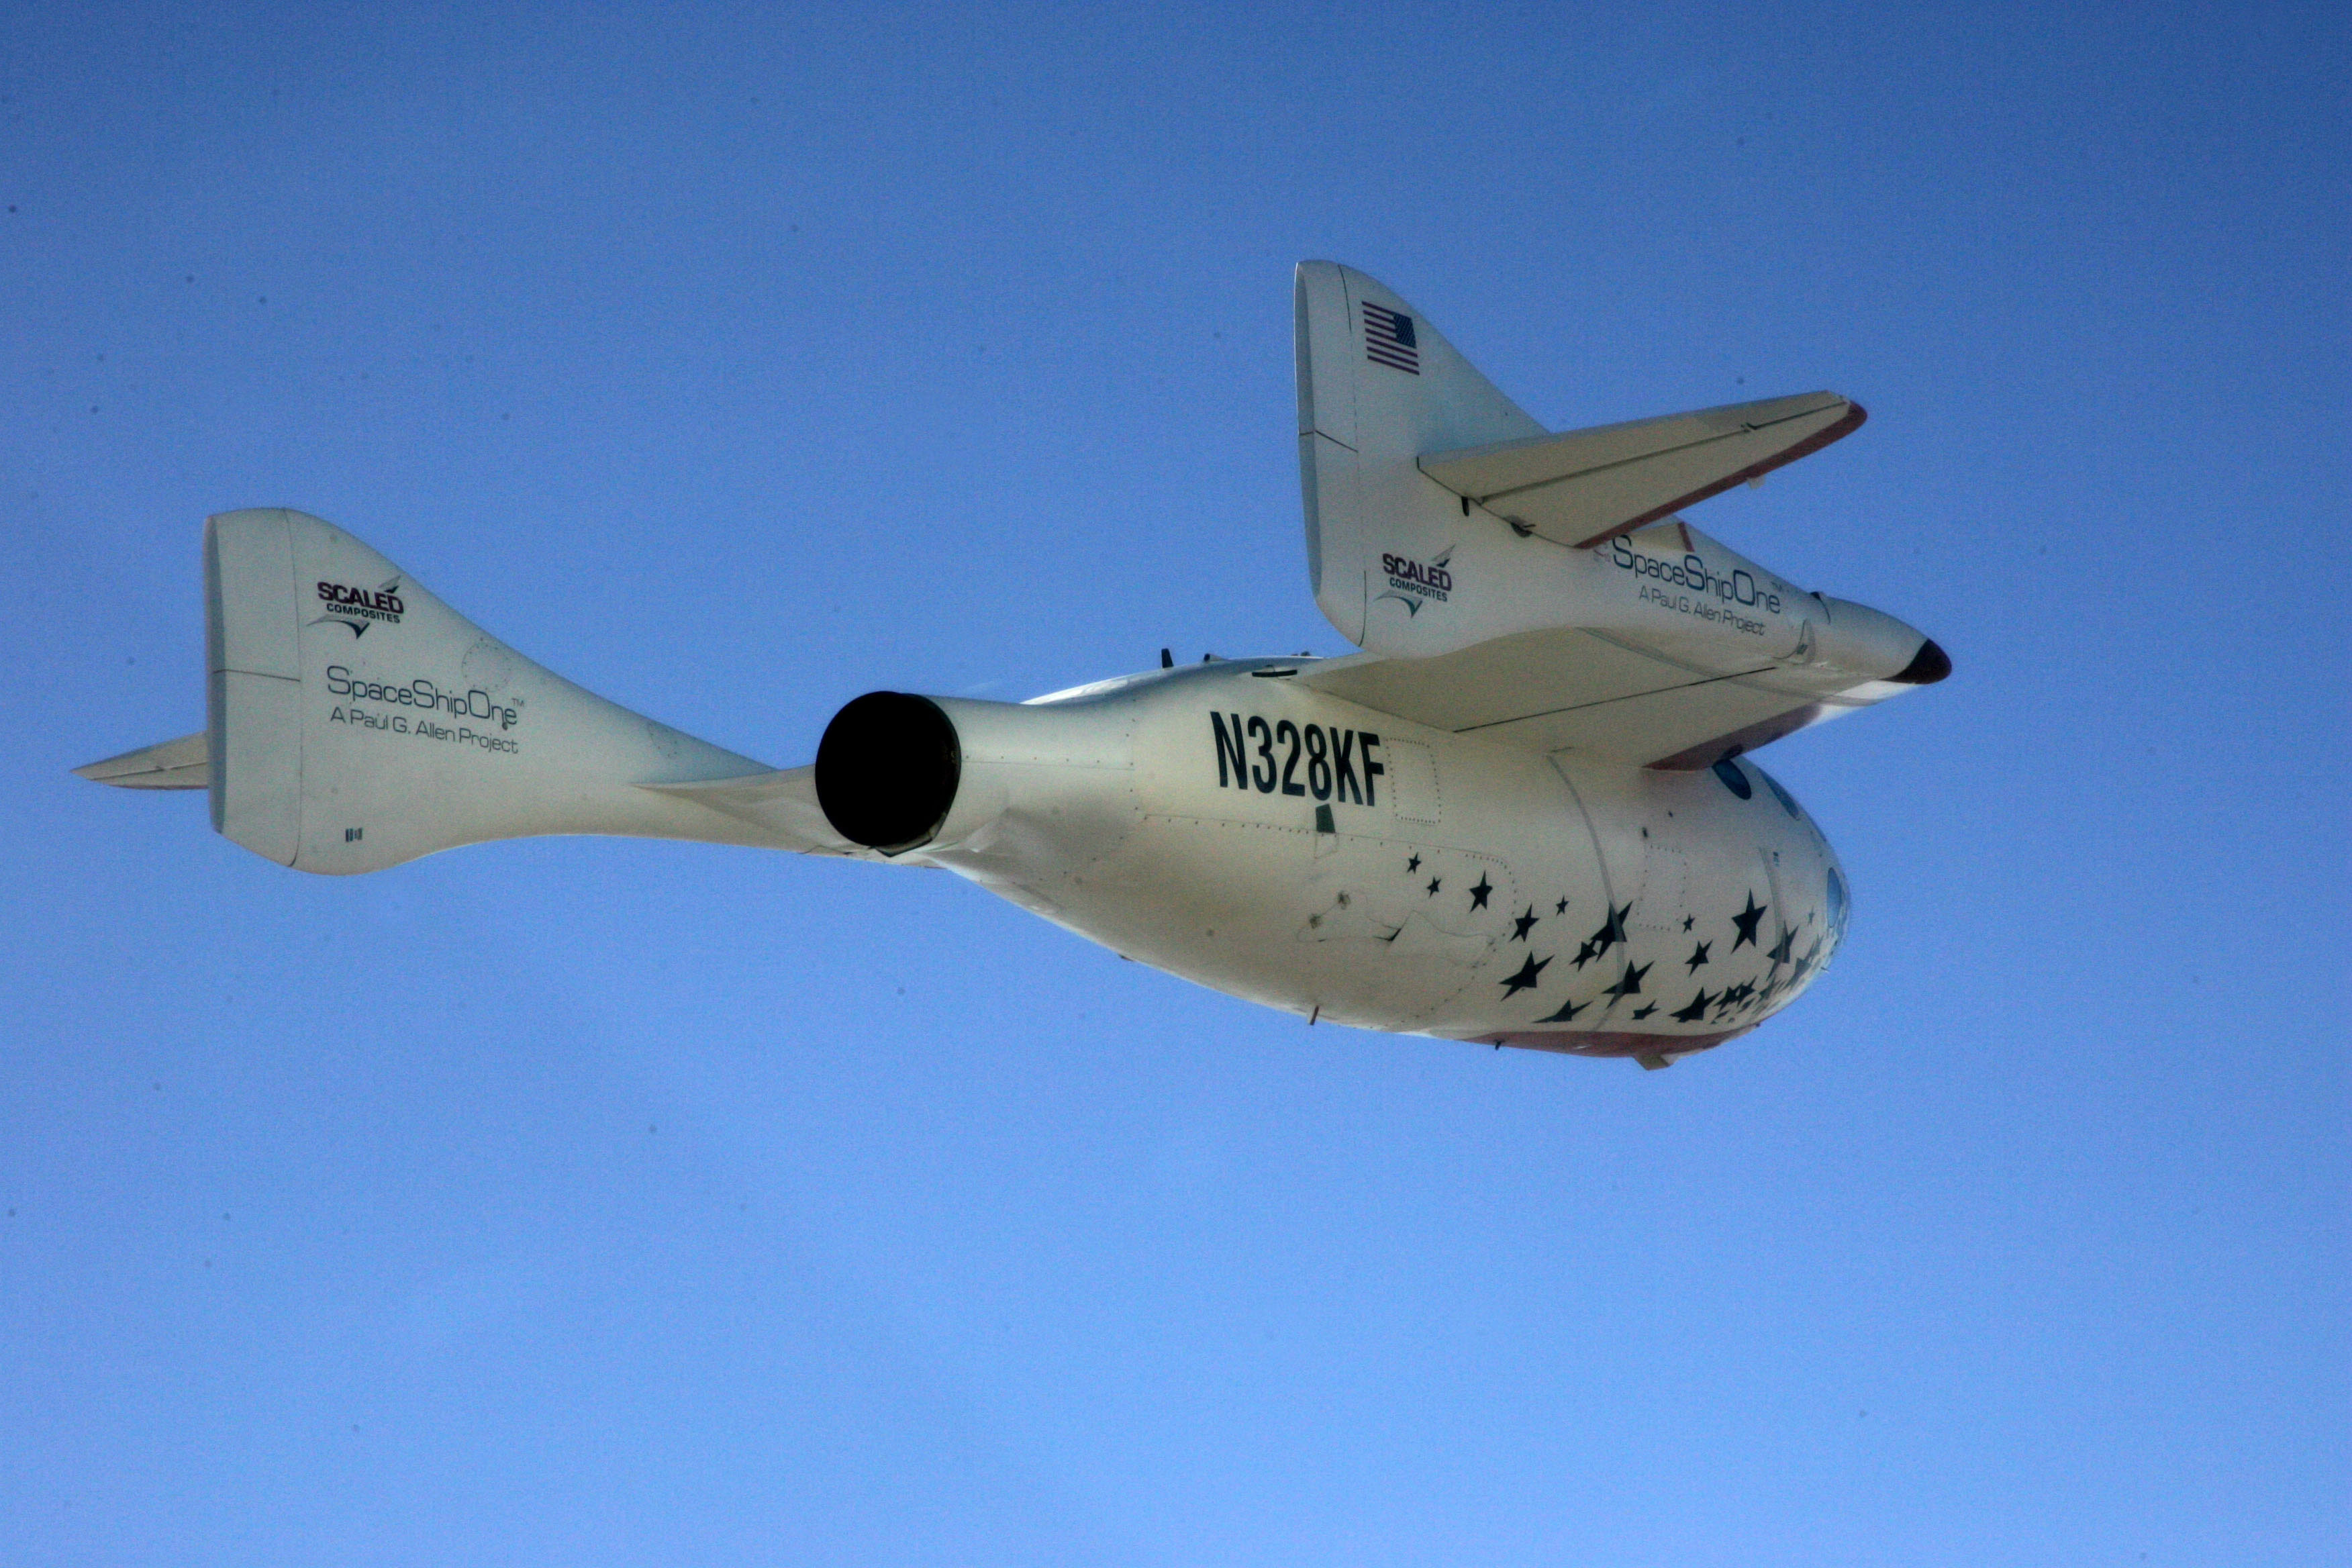 SpaceShipOne is shown gliding back to the Mojave Airport after a successful flight beyond the edge of space. Credit: Jim Campbell/Aero-News Network